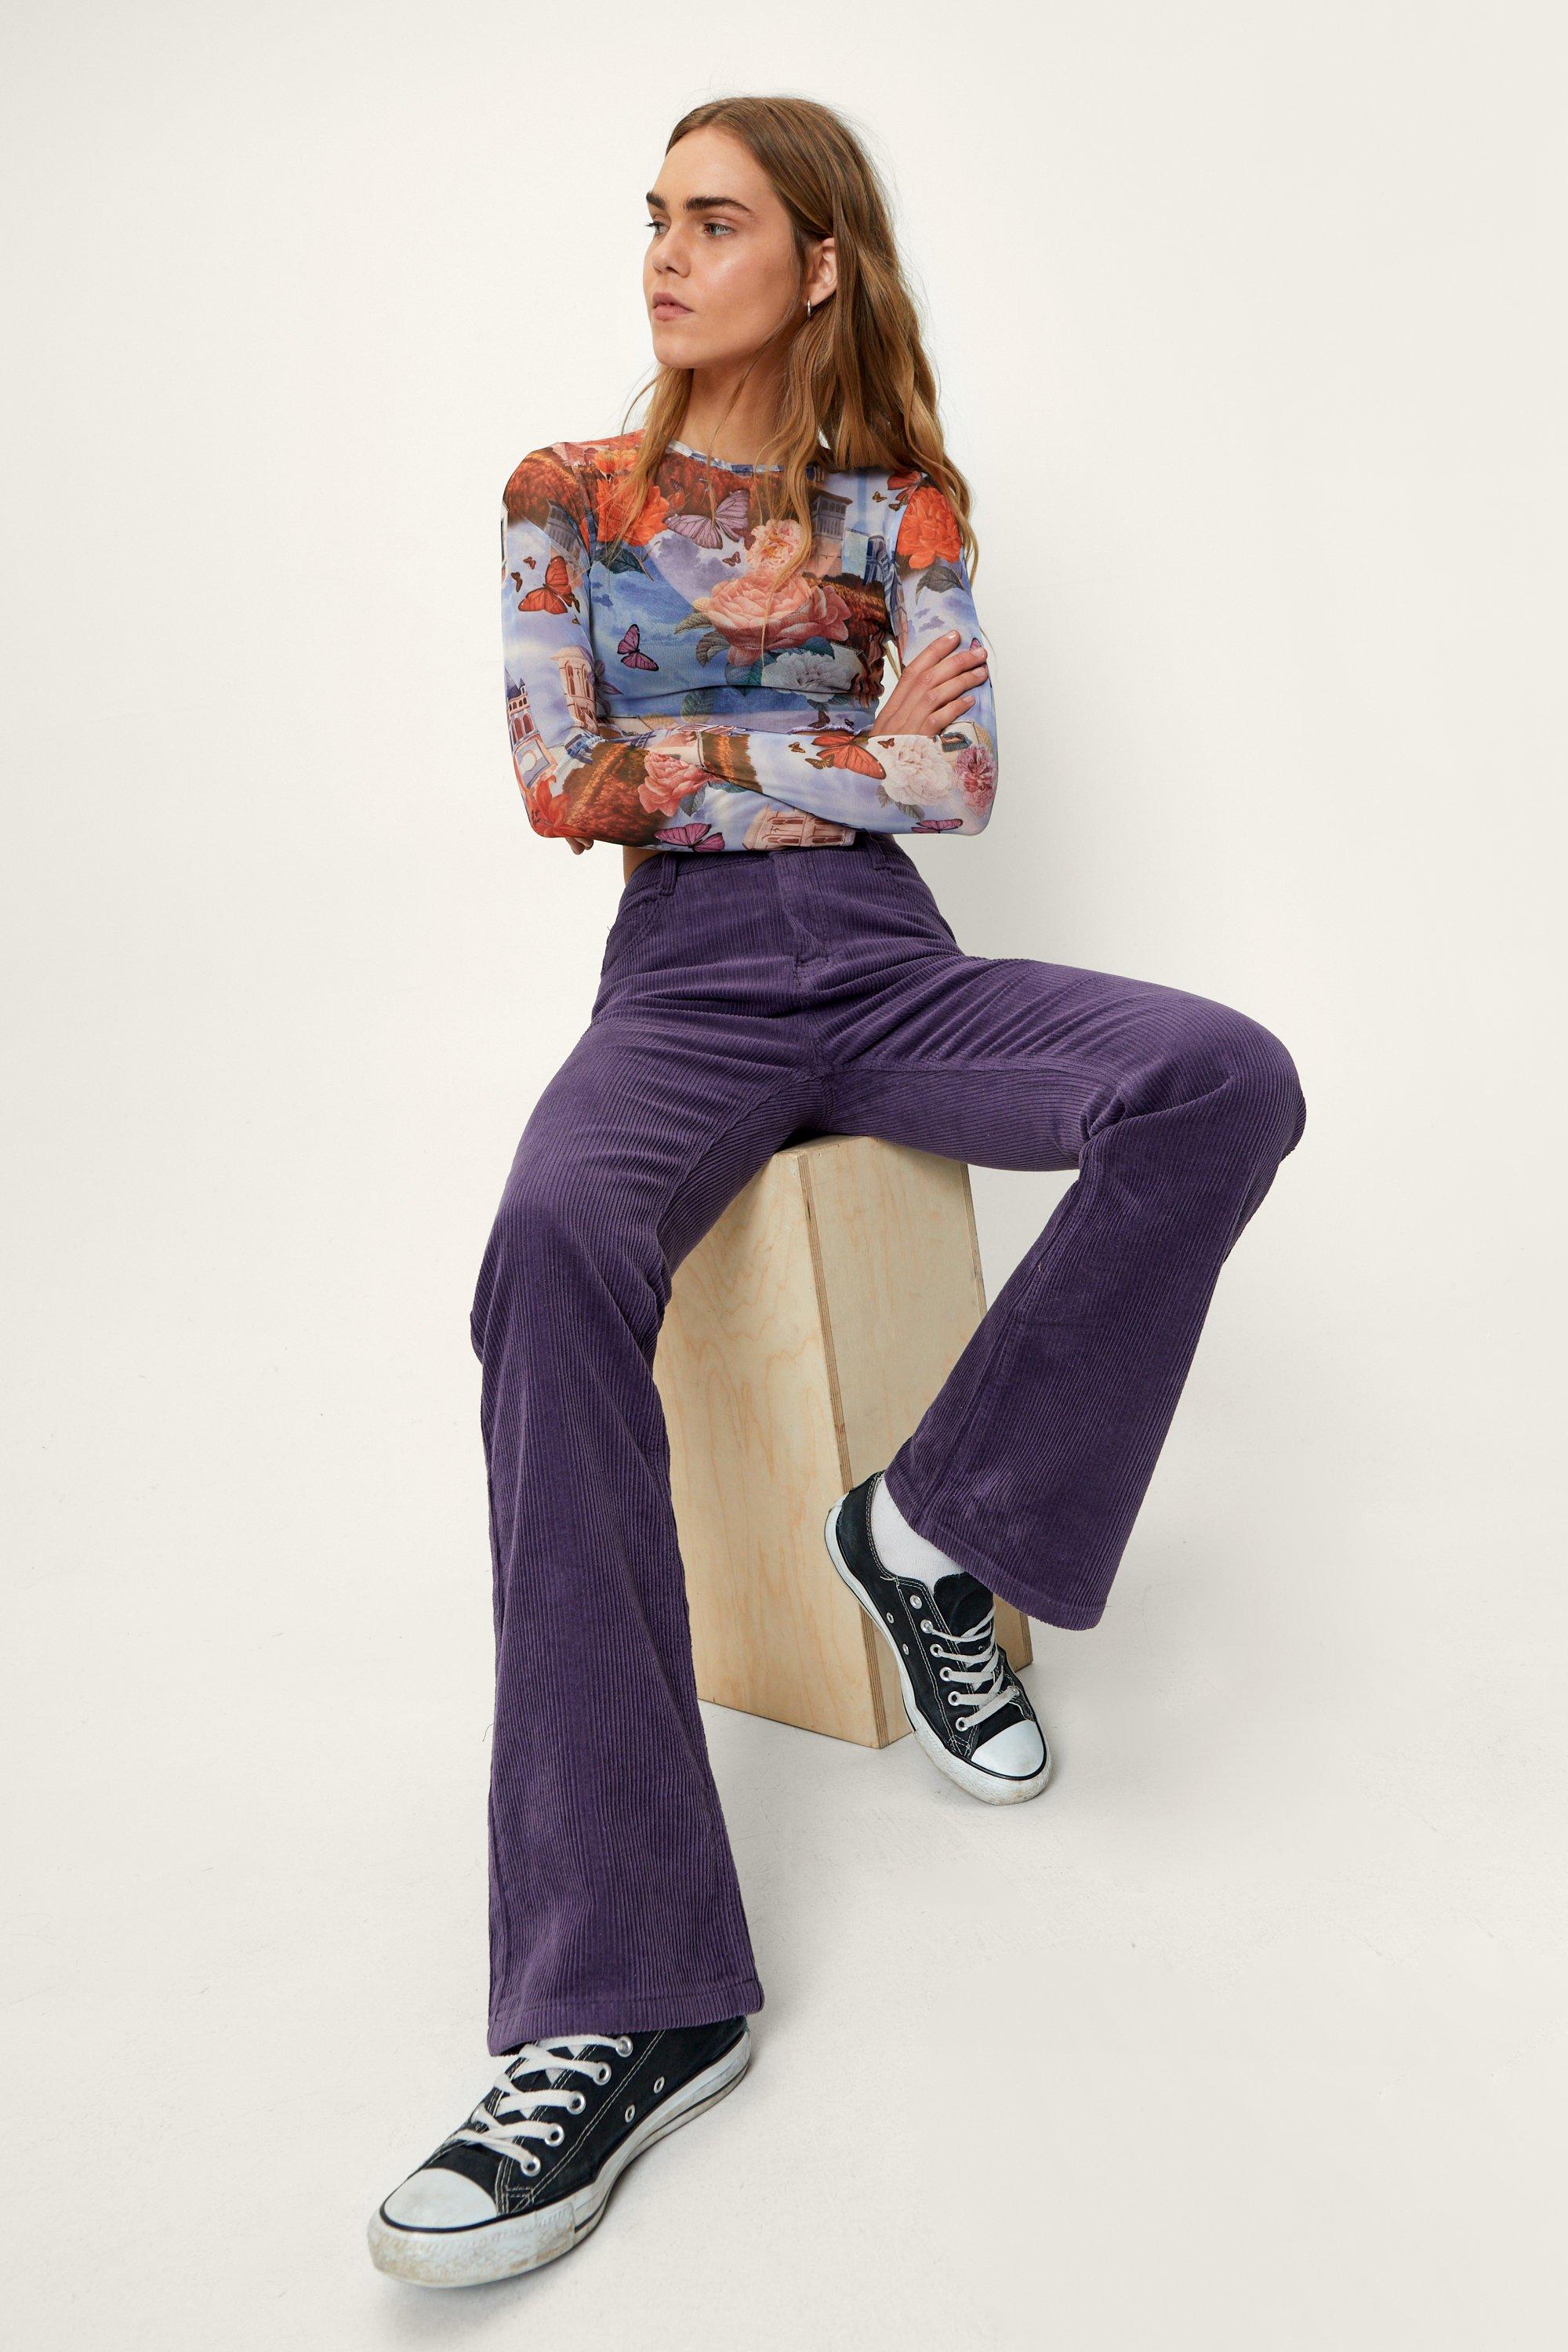 Corduroy pants  Pants outfit fall, Flared pants outfit, Purple pants outfit